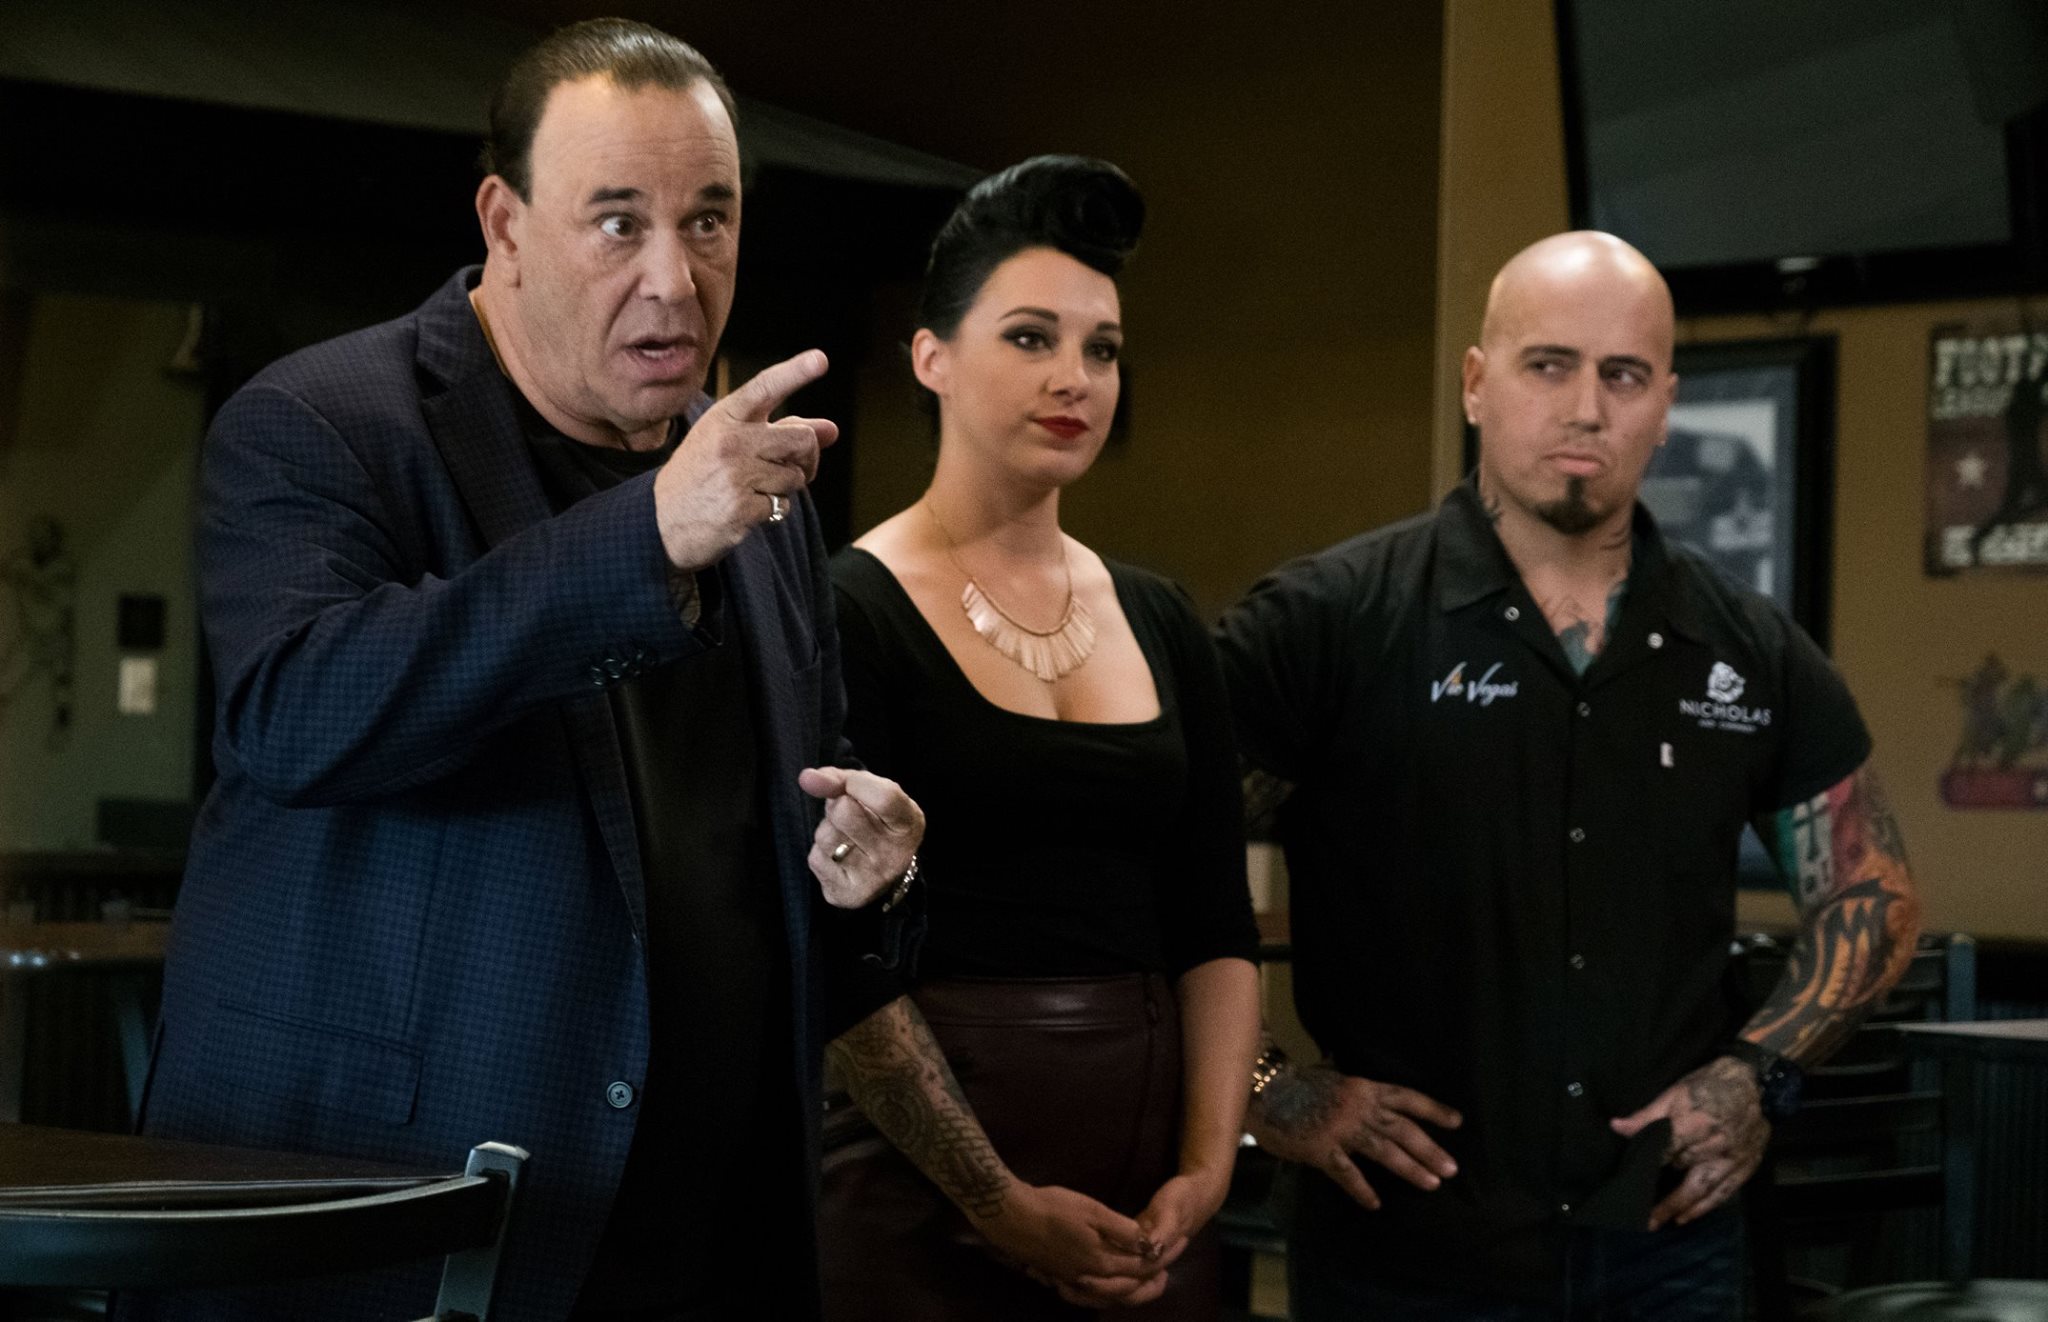 Paramount Network's "Bar Rescue" seeking extras for filming ...